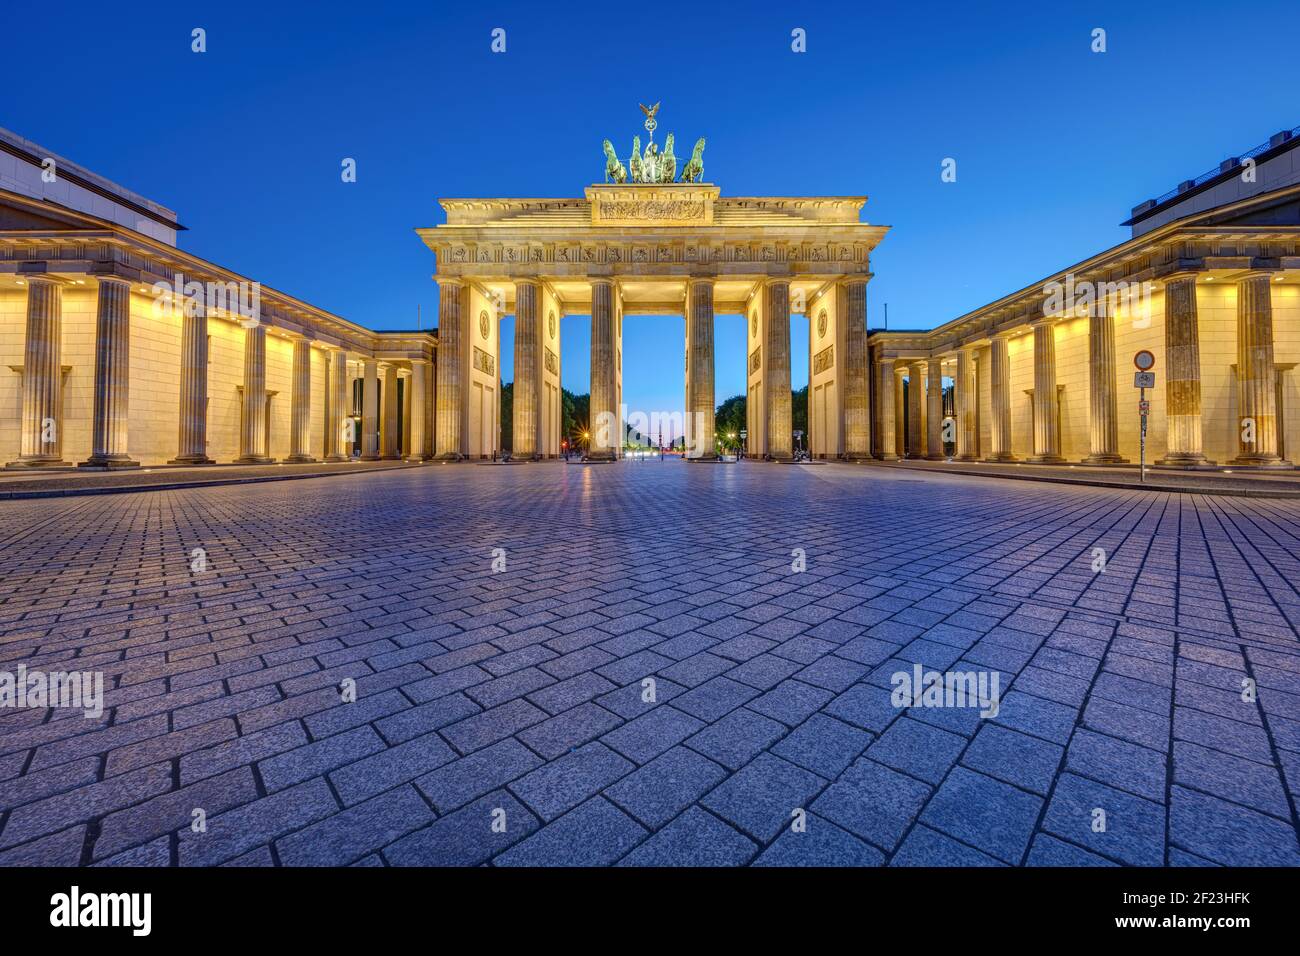 The famous illuminated Brandenburg Gate in Berlin at twilight with no people Stock Photo